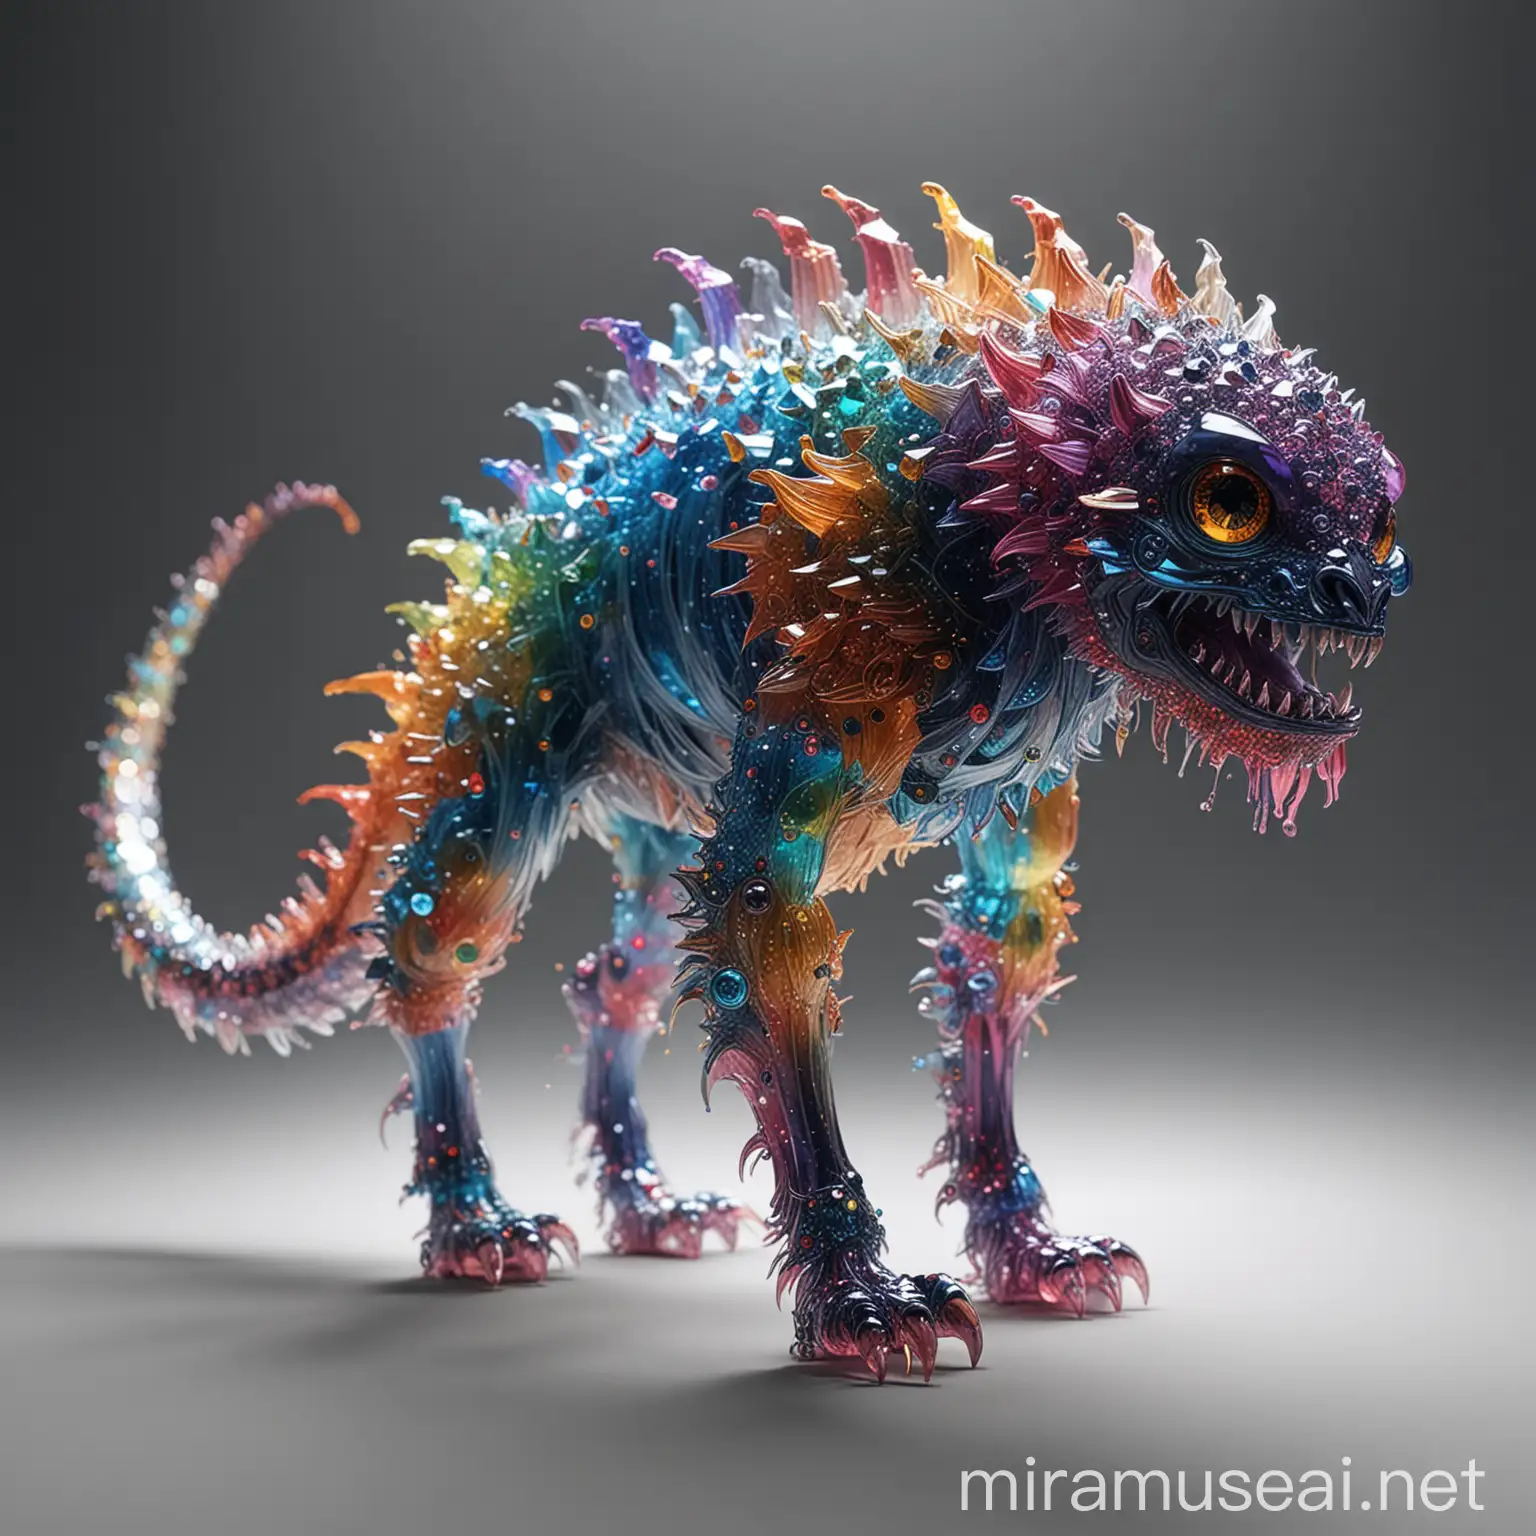 a 4 legged monster made of shiny colorfull distinct crystals different colors stunning with a long tail and sparkles, sphere eyes translucent